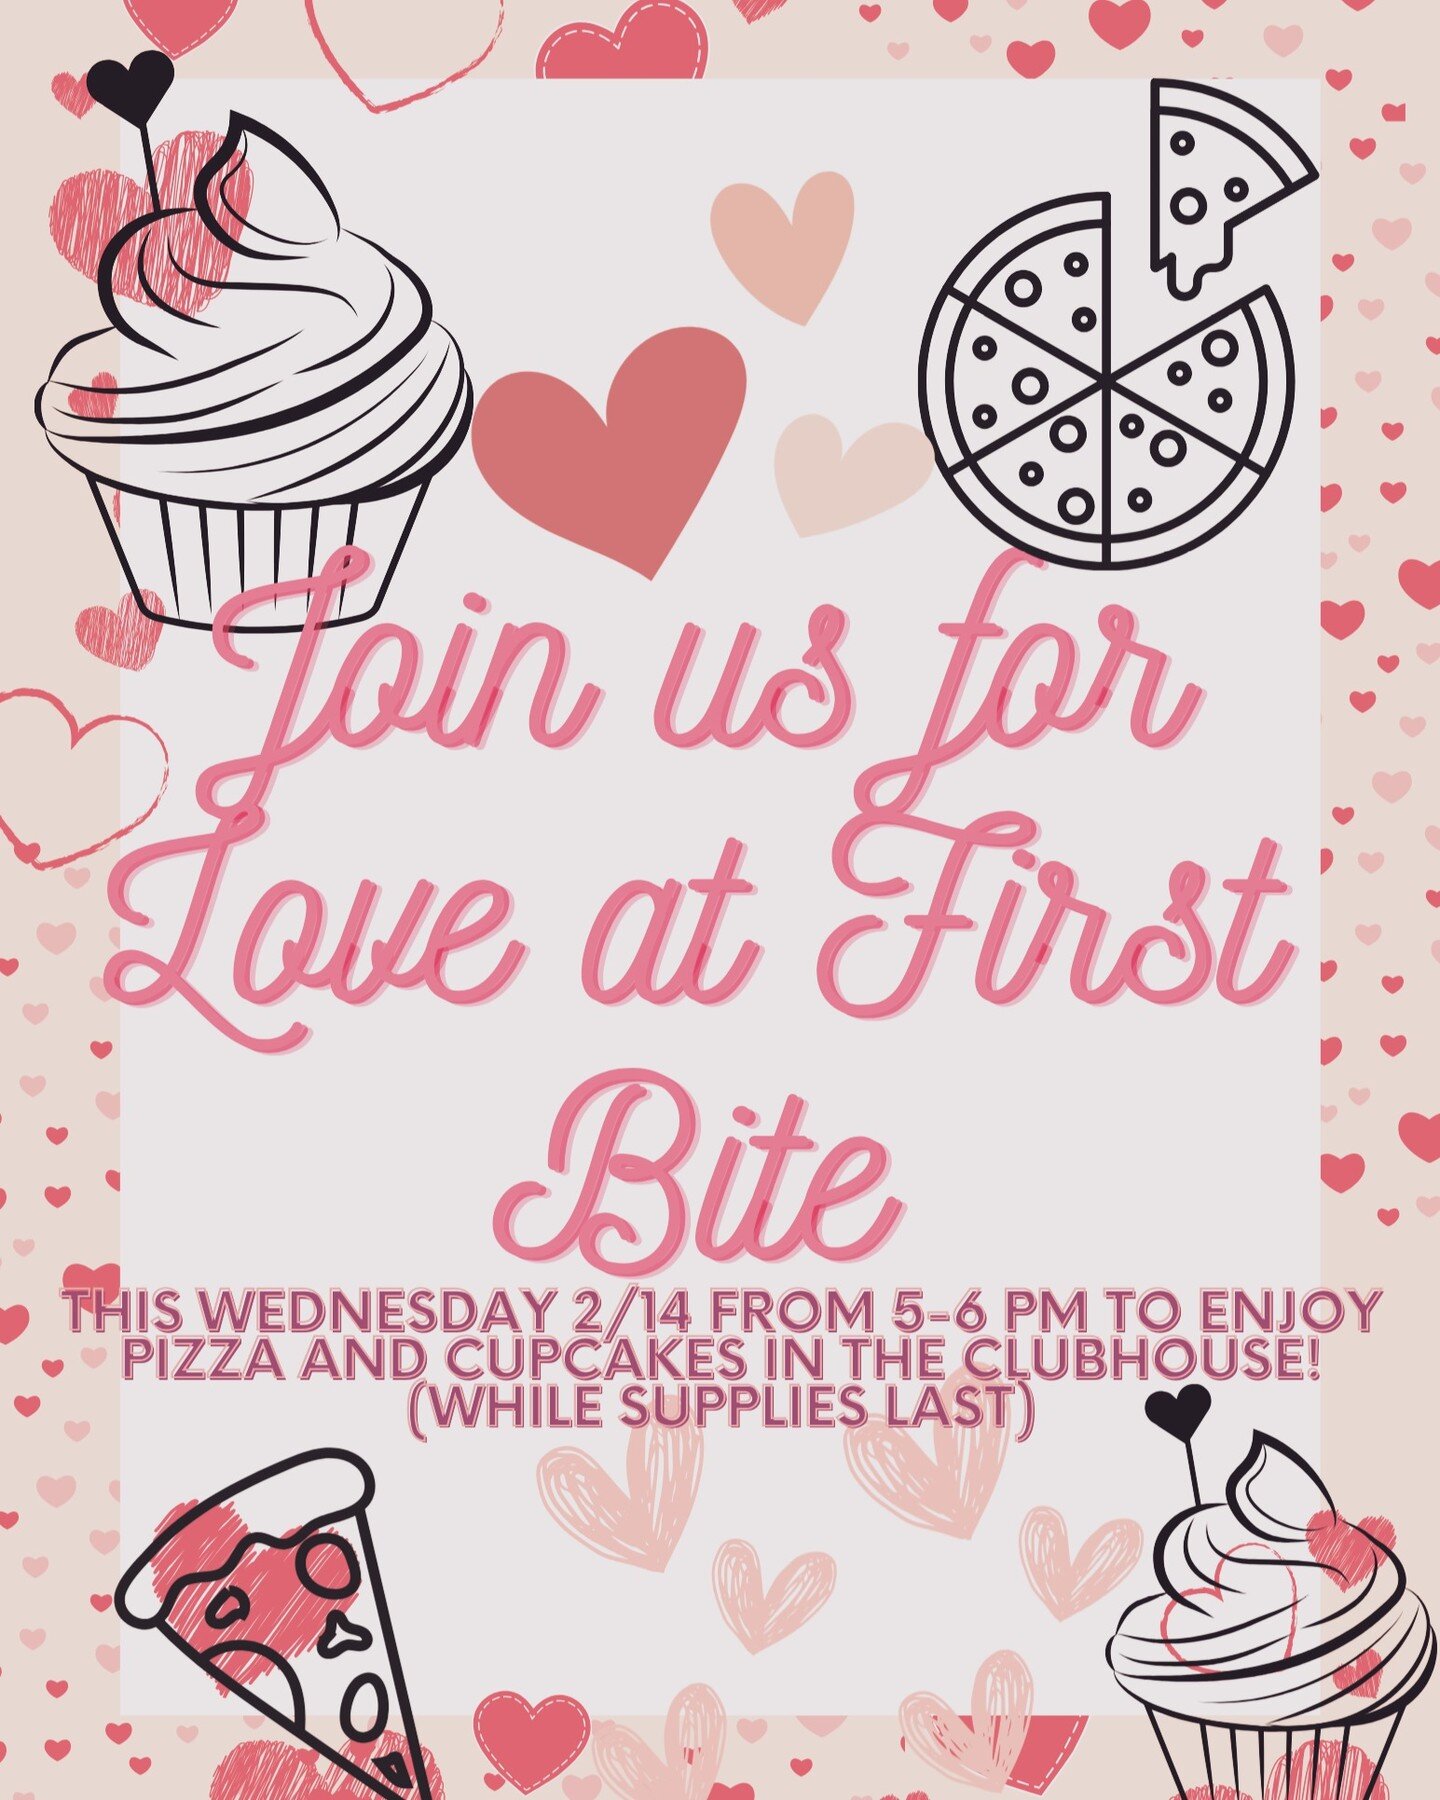 Join us this Wednesday for Love at First Bite in the clubhouse! Come out and treat yourself to pizza and cupcakes! 

Make sure to swing by the clubhouse from 5-6pm! 

#pizzapizzapizza #cupcakes #loveatfirstbite💕 #luxuryliving #residentevent #livethe